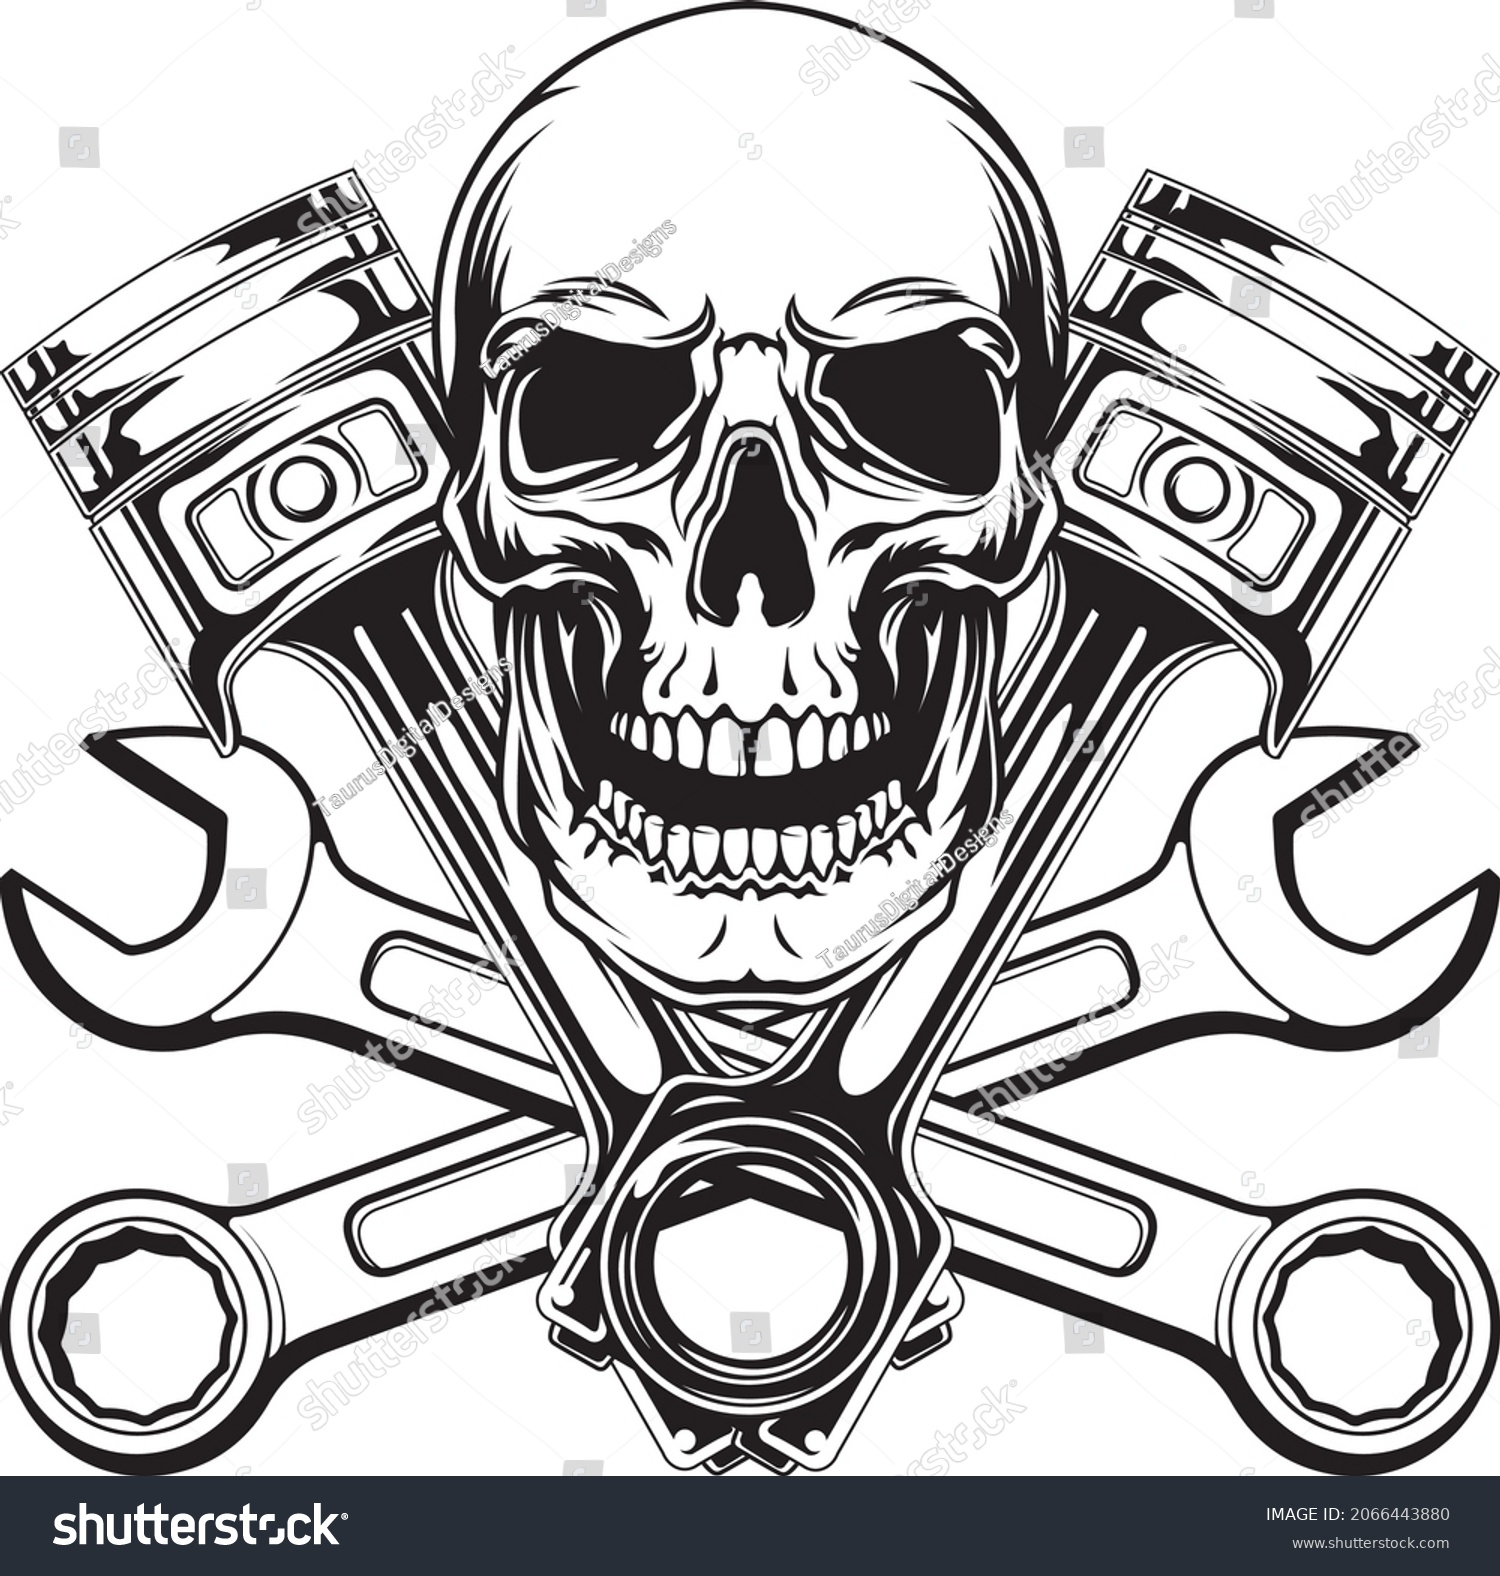 SVG of This Mechanic logo SVG is part of the Mechanic, Skull, Piston, Wrench, Garage, Tools, Repair service, and Car service collections. svg